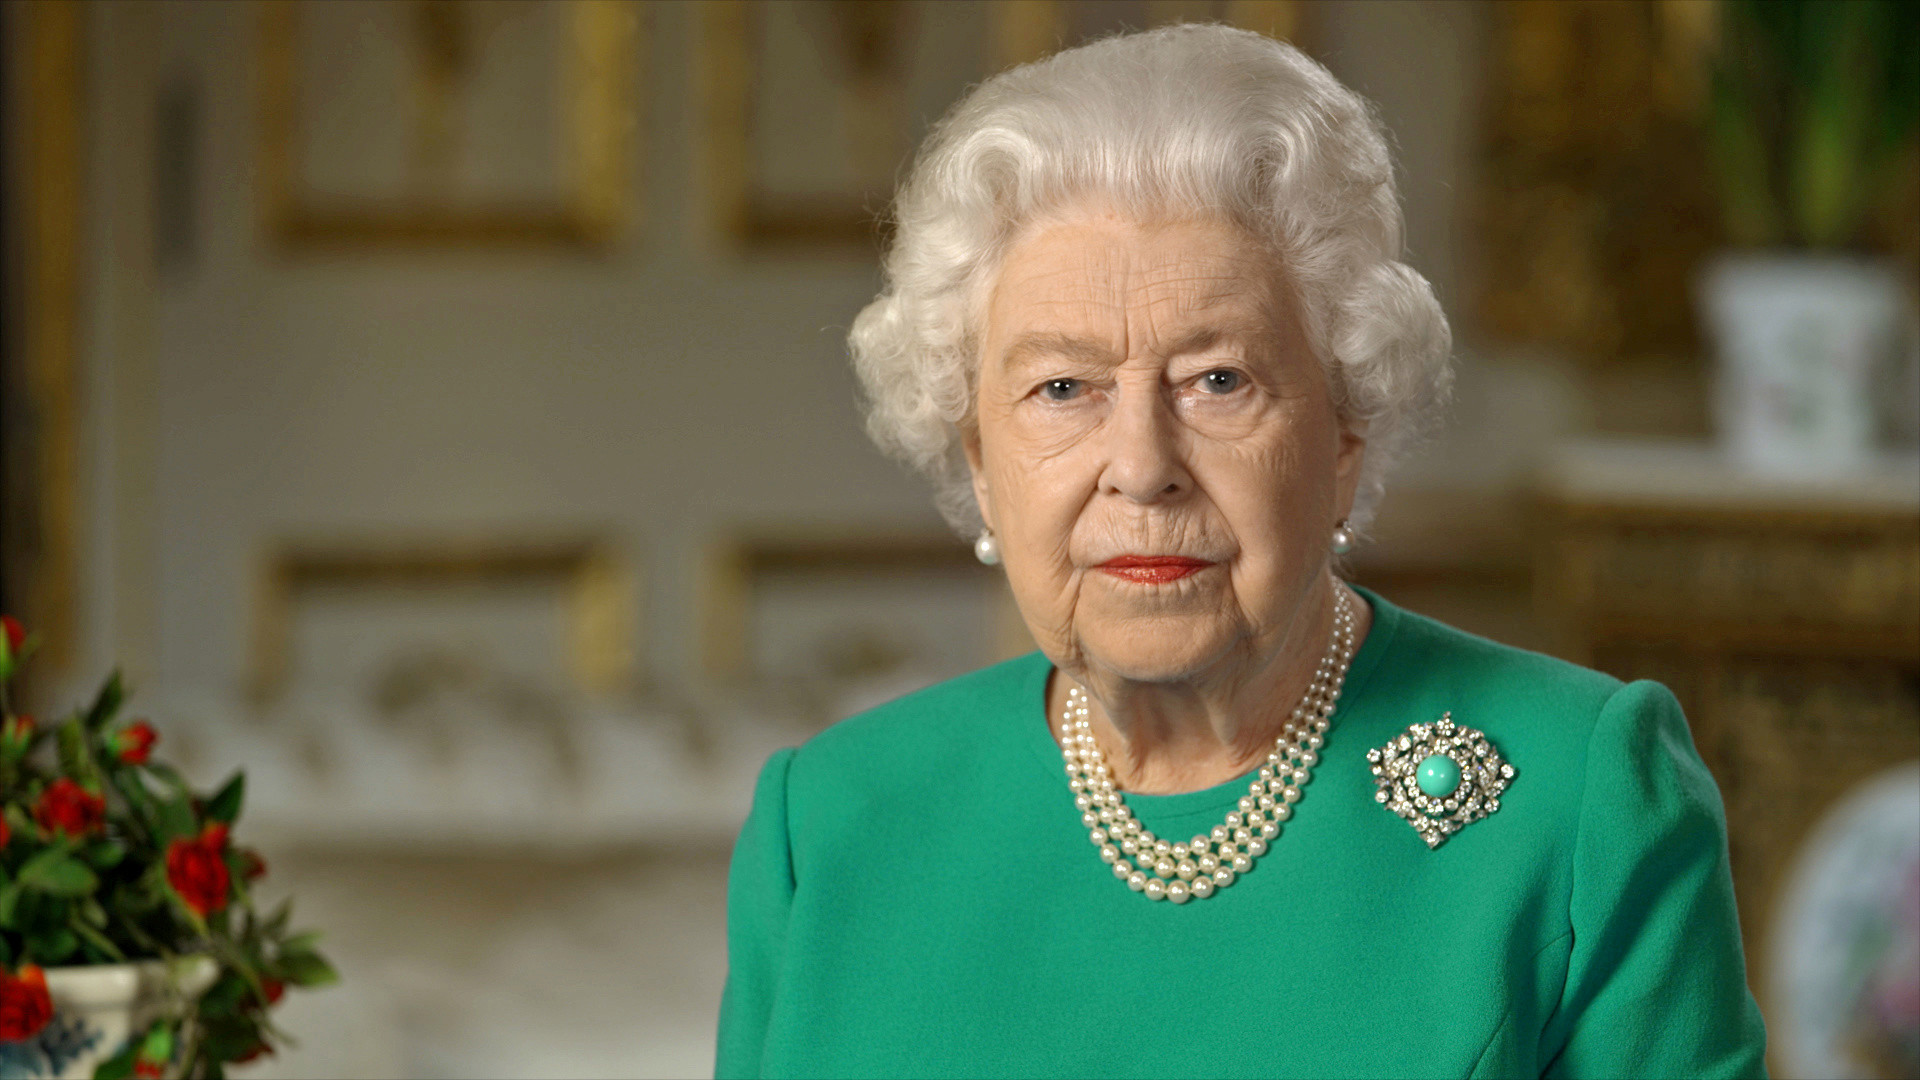  The Queen gave her second address to the nation in a week - after speaking on television last weekend